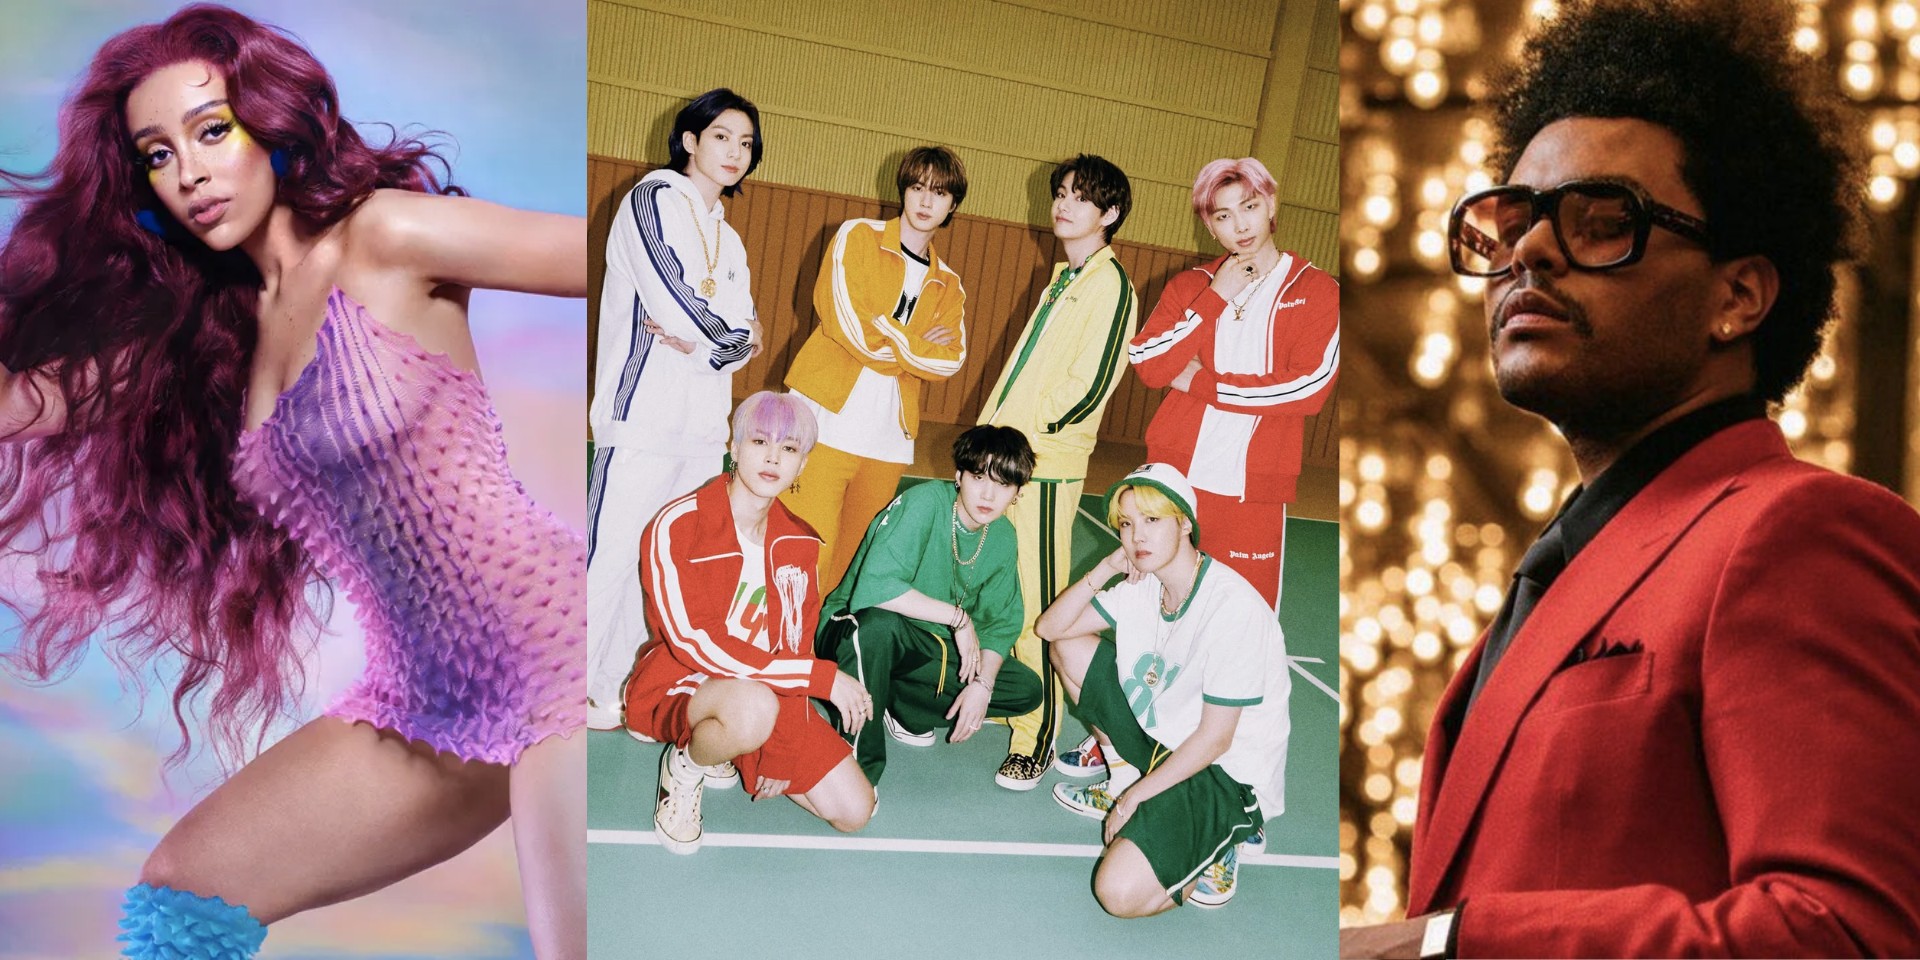 BTS, Doja Cat, The Weeknd, and more to appear in YouTube's ESCAPE2021 interactive livestream